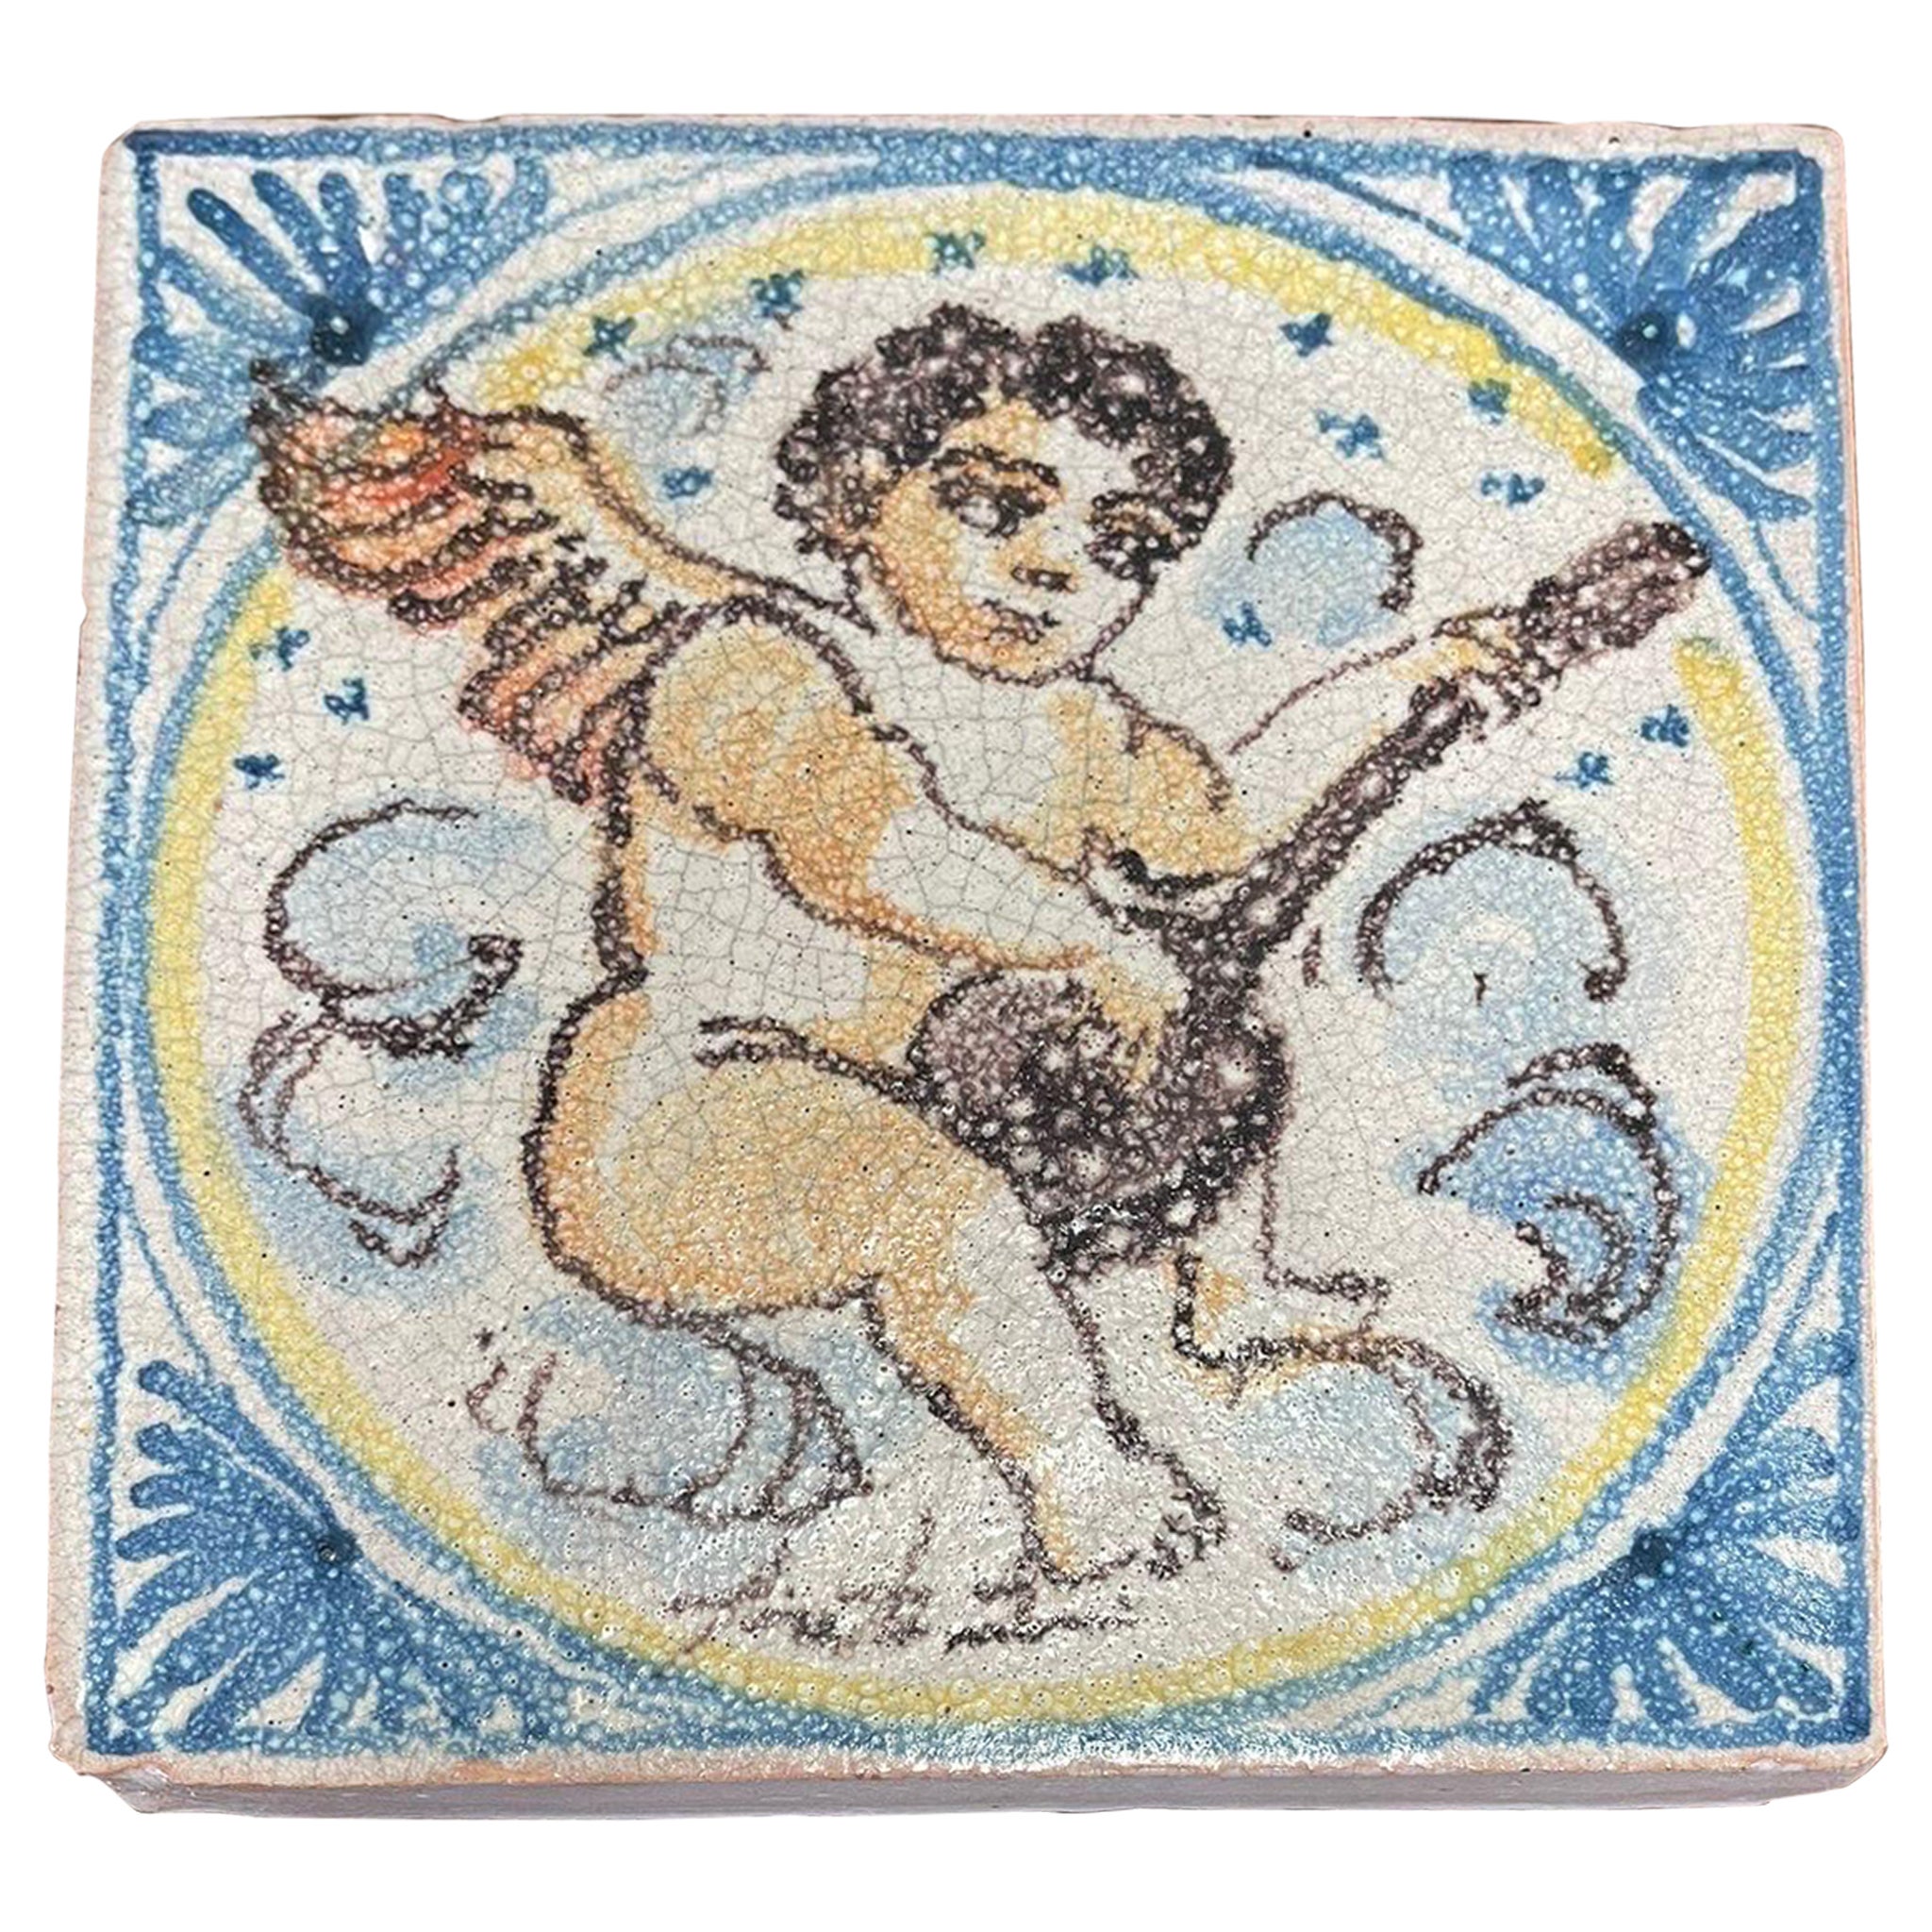 Vintage Italian Hand Painted Ceramic Tile Decorative Wall Hanging With Cherub mo For Sale